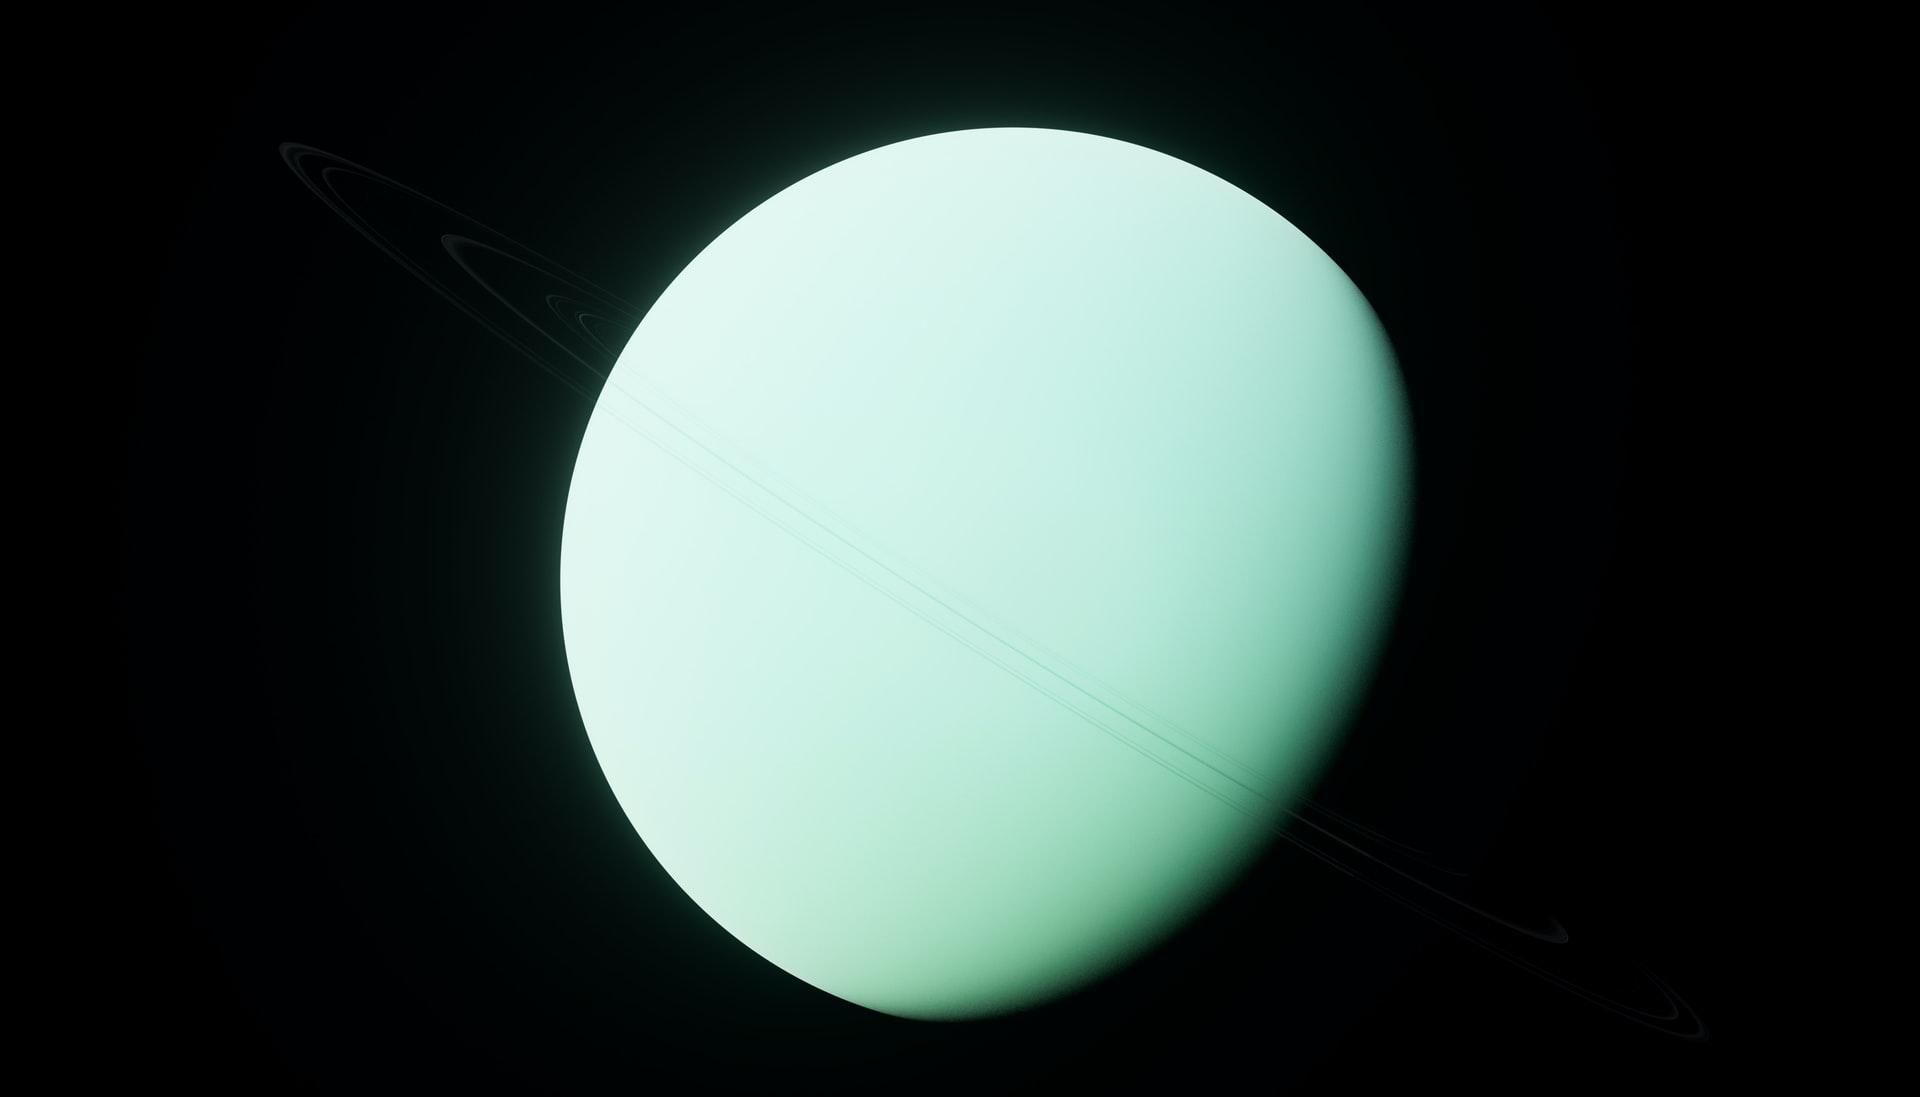 Uranus' surface is the most homogeneous in the solar system (Source: Unplash/Planet Volumes)